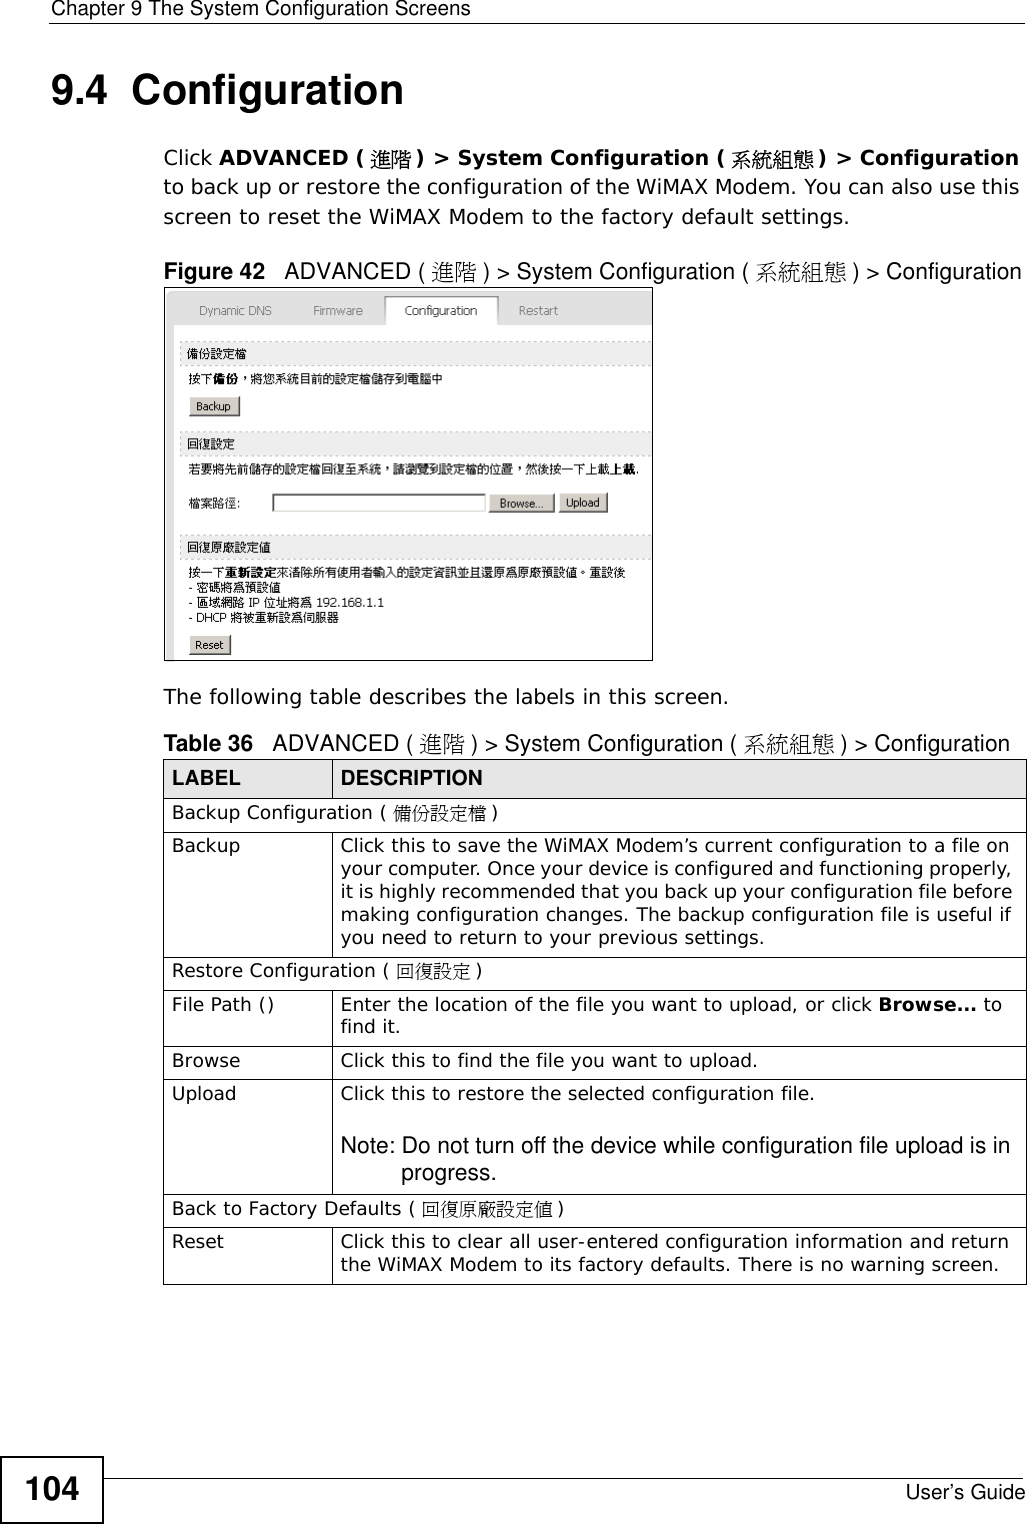 Chapter 9 The System Configuration ScreensUser’s Guide1049.4  ConfigurationClick ADVANCED (進階) &gt; System Configuration (系統組態) &gt; Configuration to back up or restore the configuration of the WiMAX Modem. You can also use this screen to reset the WiMAX Modem to the factory default settings.Figure 42   ADVANCED ( 進階 ) &gt; System Configuration ( 系統組態 ) &gt; ConfigurationThe following table describes the labels in this screen.  Table 36   ADVANCED ( 進階 ) &gt; System Configuration ( 系統組態 ) &gt; ConfigurationLABEL DESCRIPTIONBackup Configuration ( 備份設定檔 )Backup Click this to save the WiMAX Modem’s current configuration to a file on your computer. Once your device is configured and functioning properly, it is highly recommended that you back up your configuration file before making configuration changes. The backup configuration file is useful if you need to return to your previous settings.Restore Configuration ( 回復設定 )File Path () Enter the location of the file you want to upload, or click Browse... to find it.Browse Click this to find the file you want to upload.Upload Click this to restore the selected configuration file.Note: Do not turn off the device while configuration file upload is in progress.Back to Factory Defaults ( 回復原廠設定值 )Reset Click this to clear all user-entered configuration information and return the WiMAX Modem to its factory defaults. There is no warning screen.